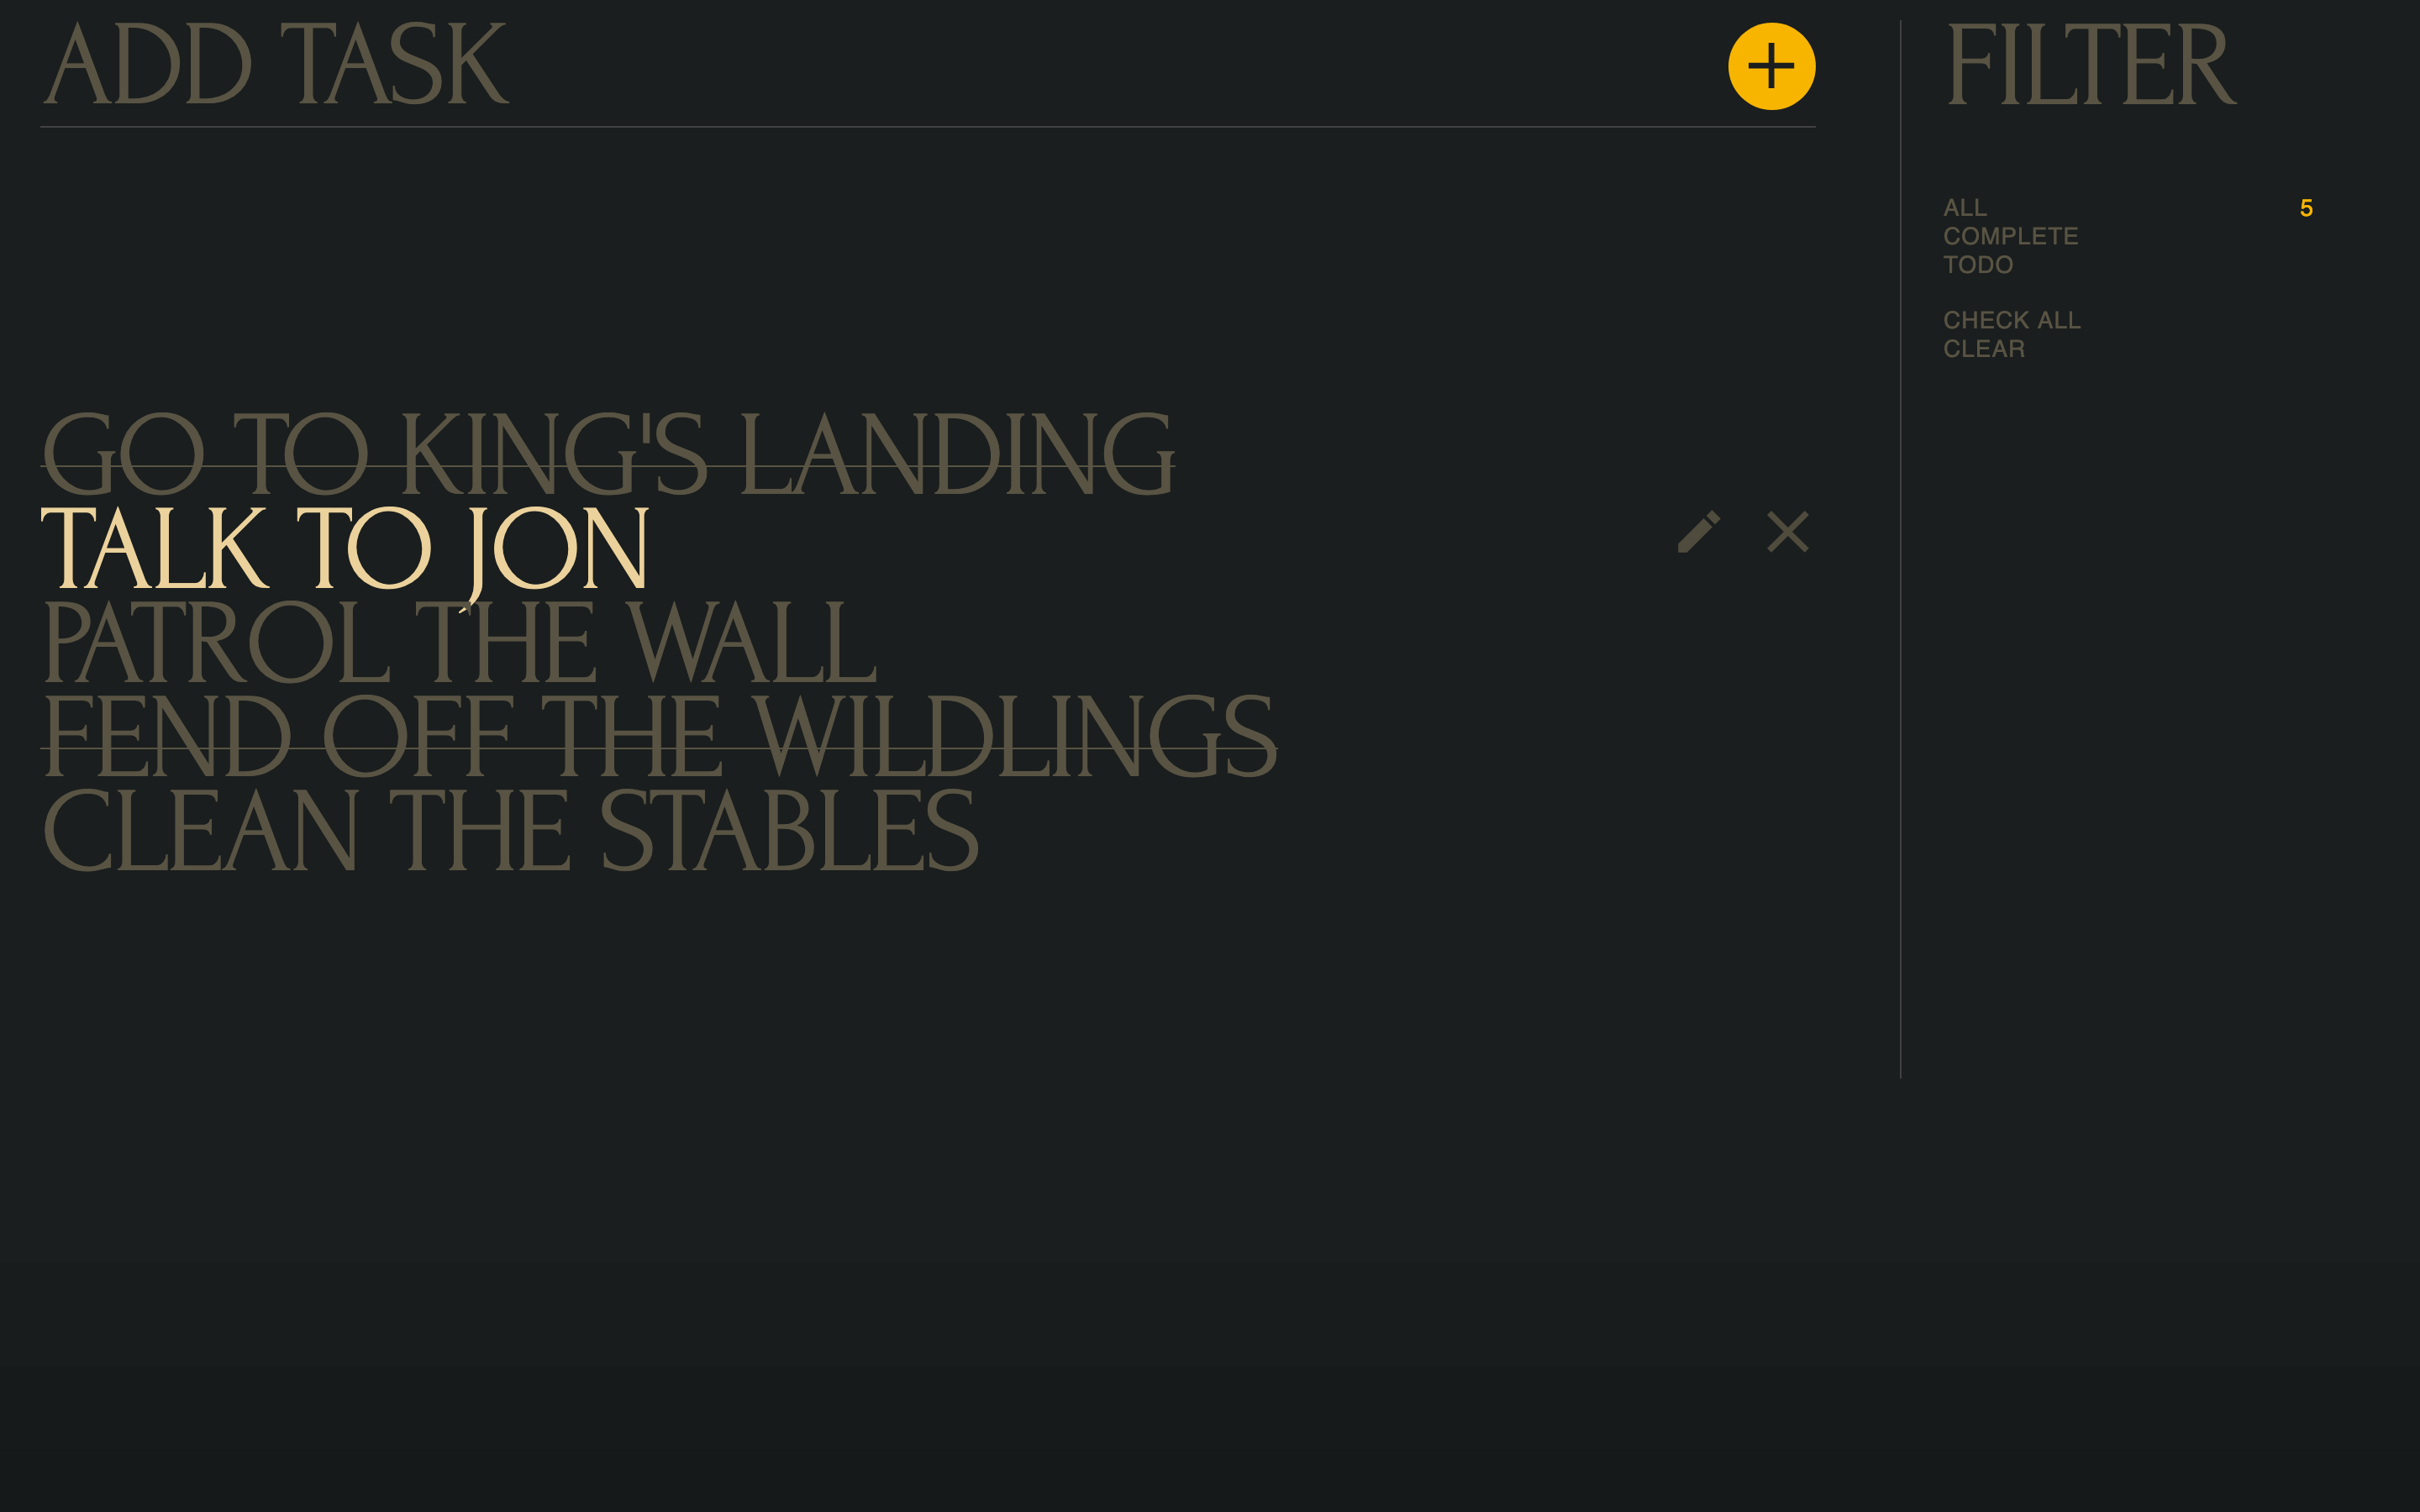 game of tasks screenshot from site